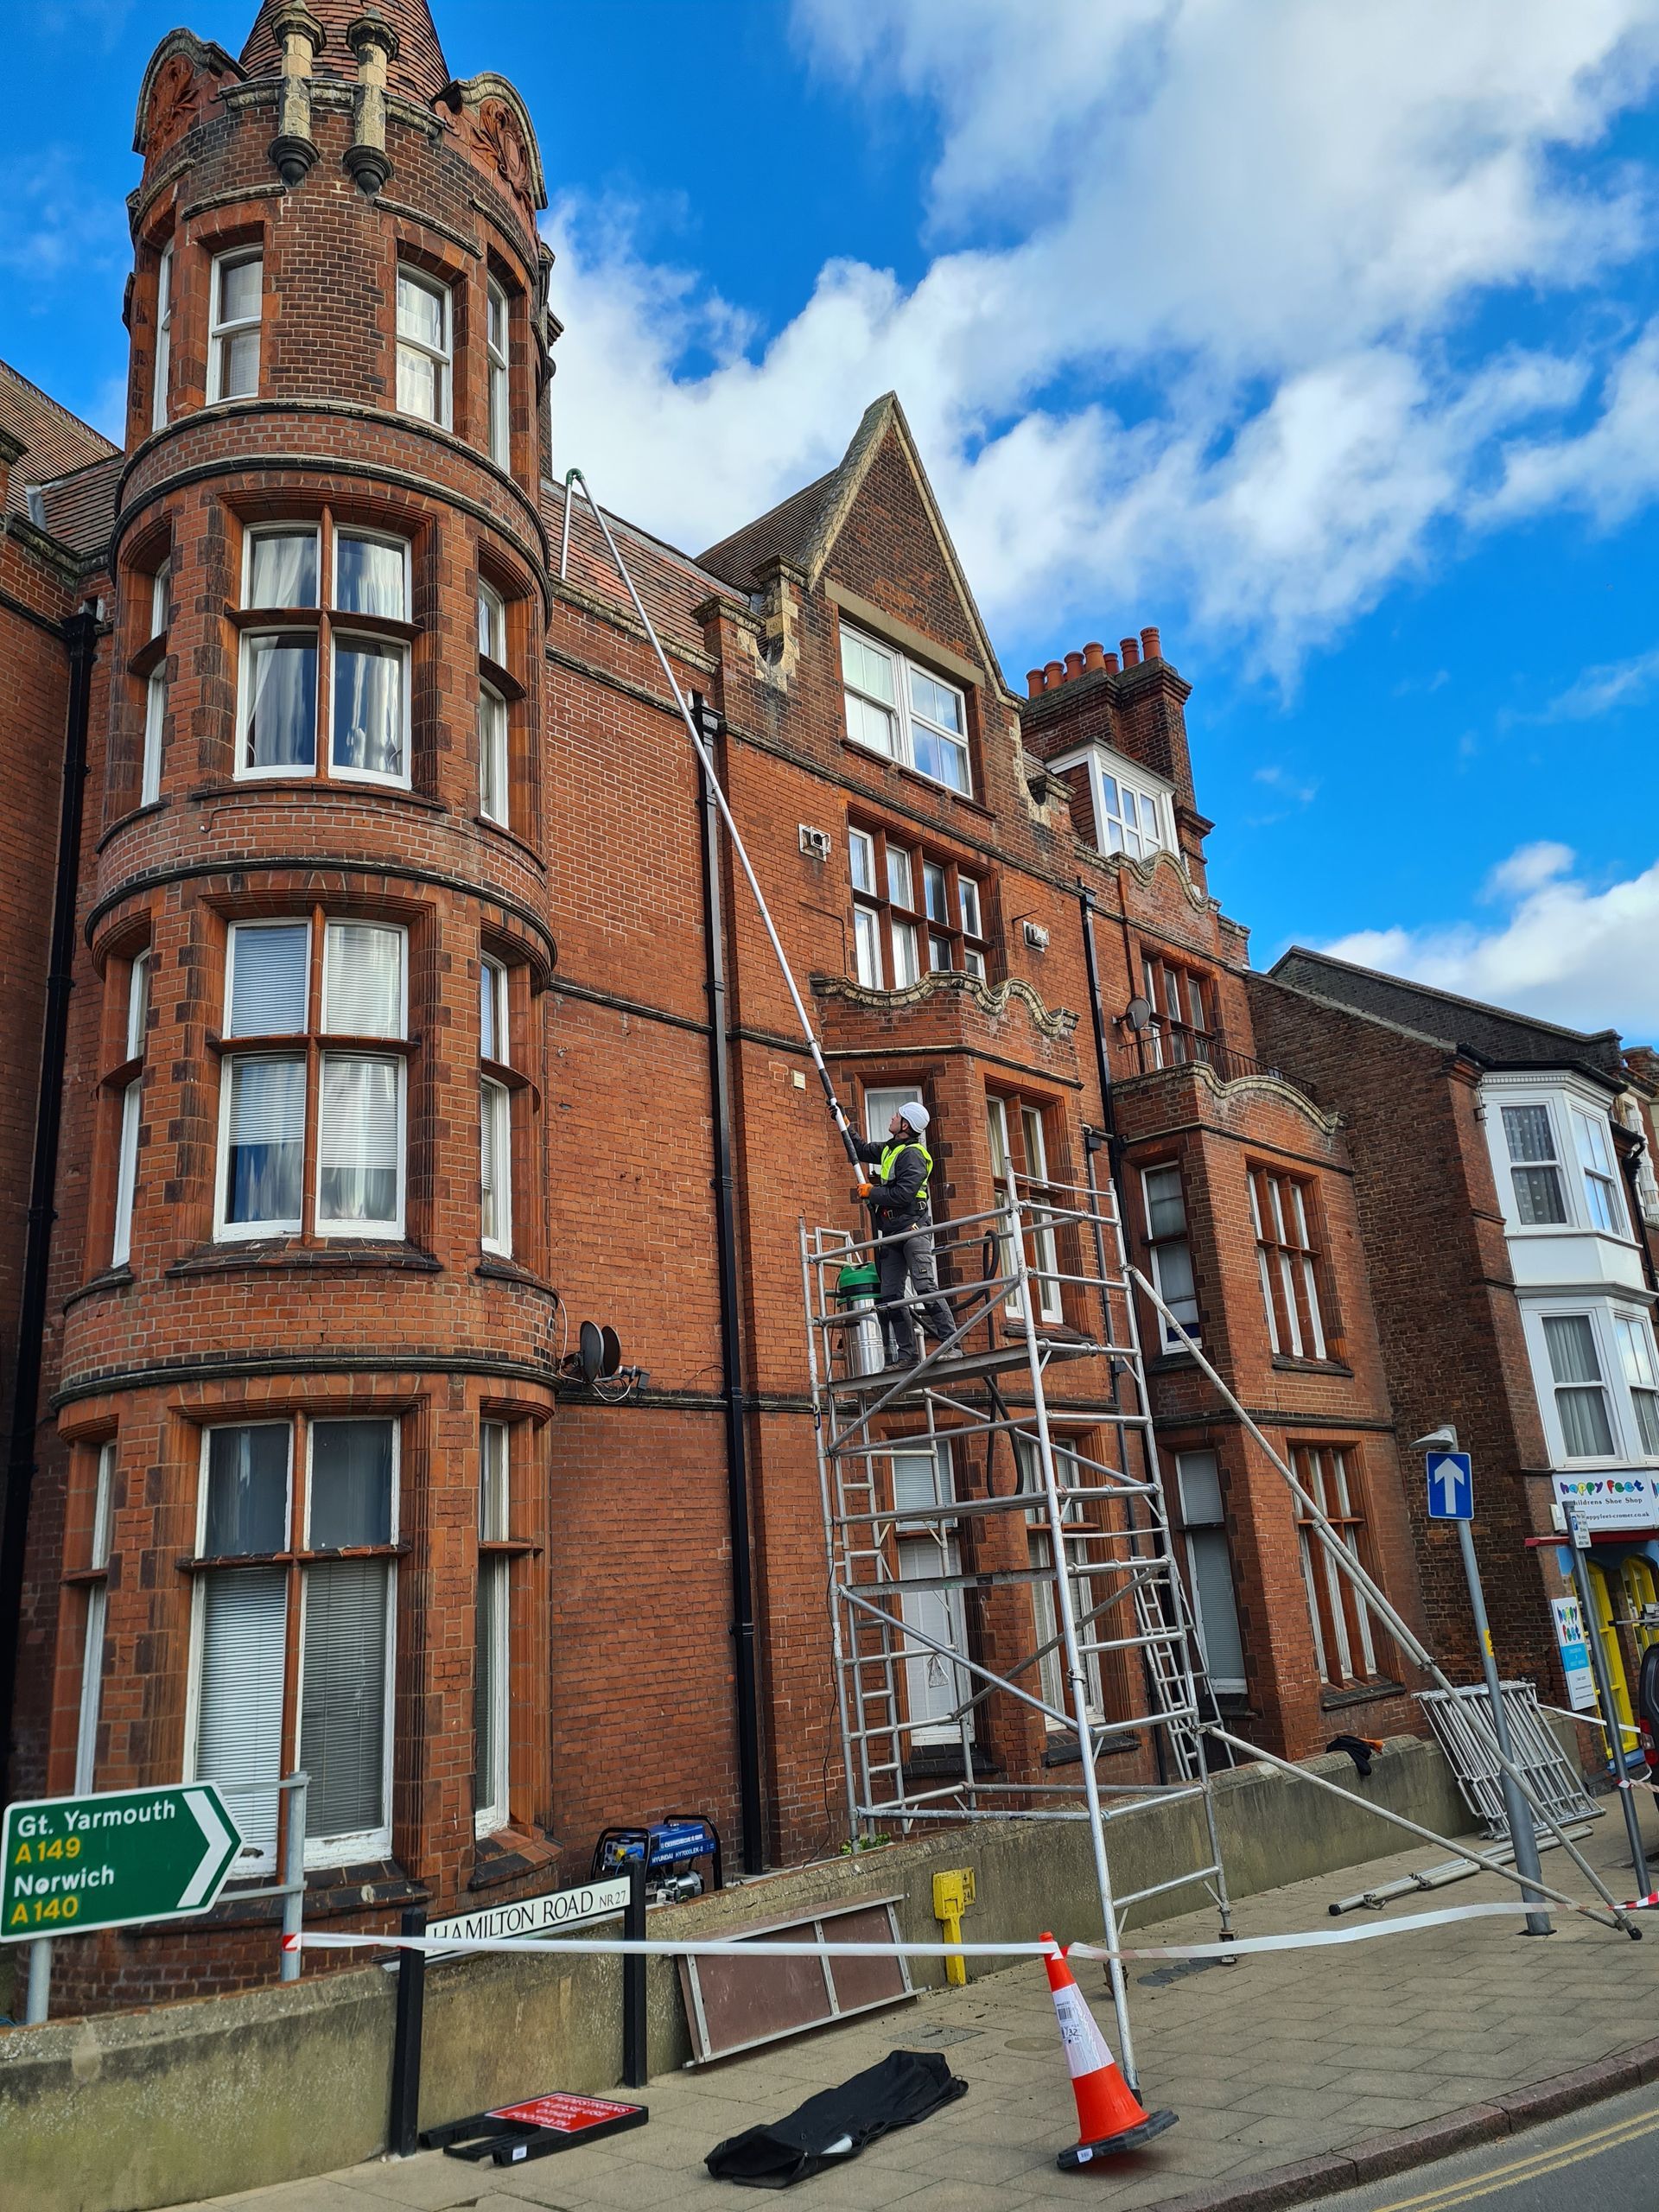 Gutter cleaning in Great Yarmouth with a vacuum and scaffold tower